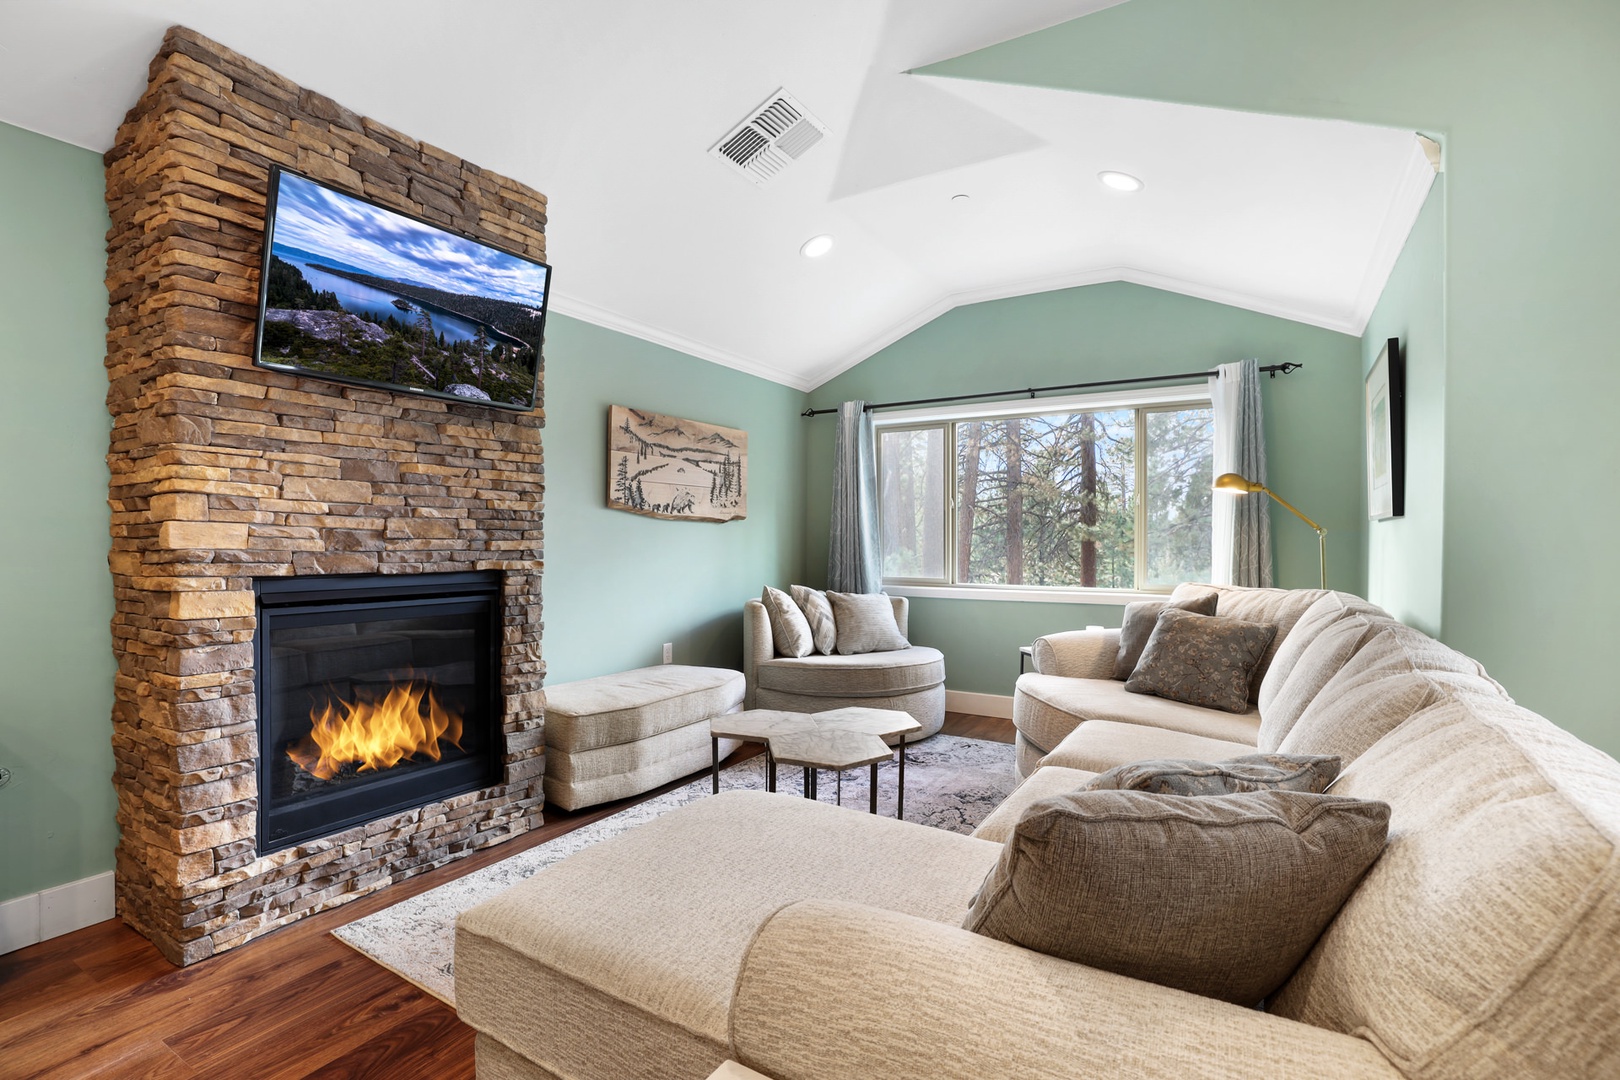 Living room with smart TV and gas fireplace